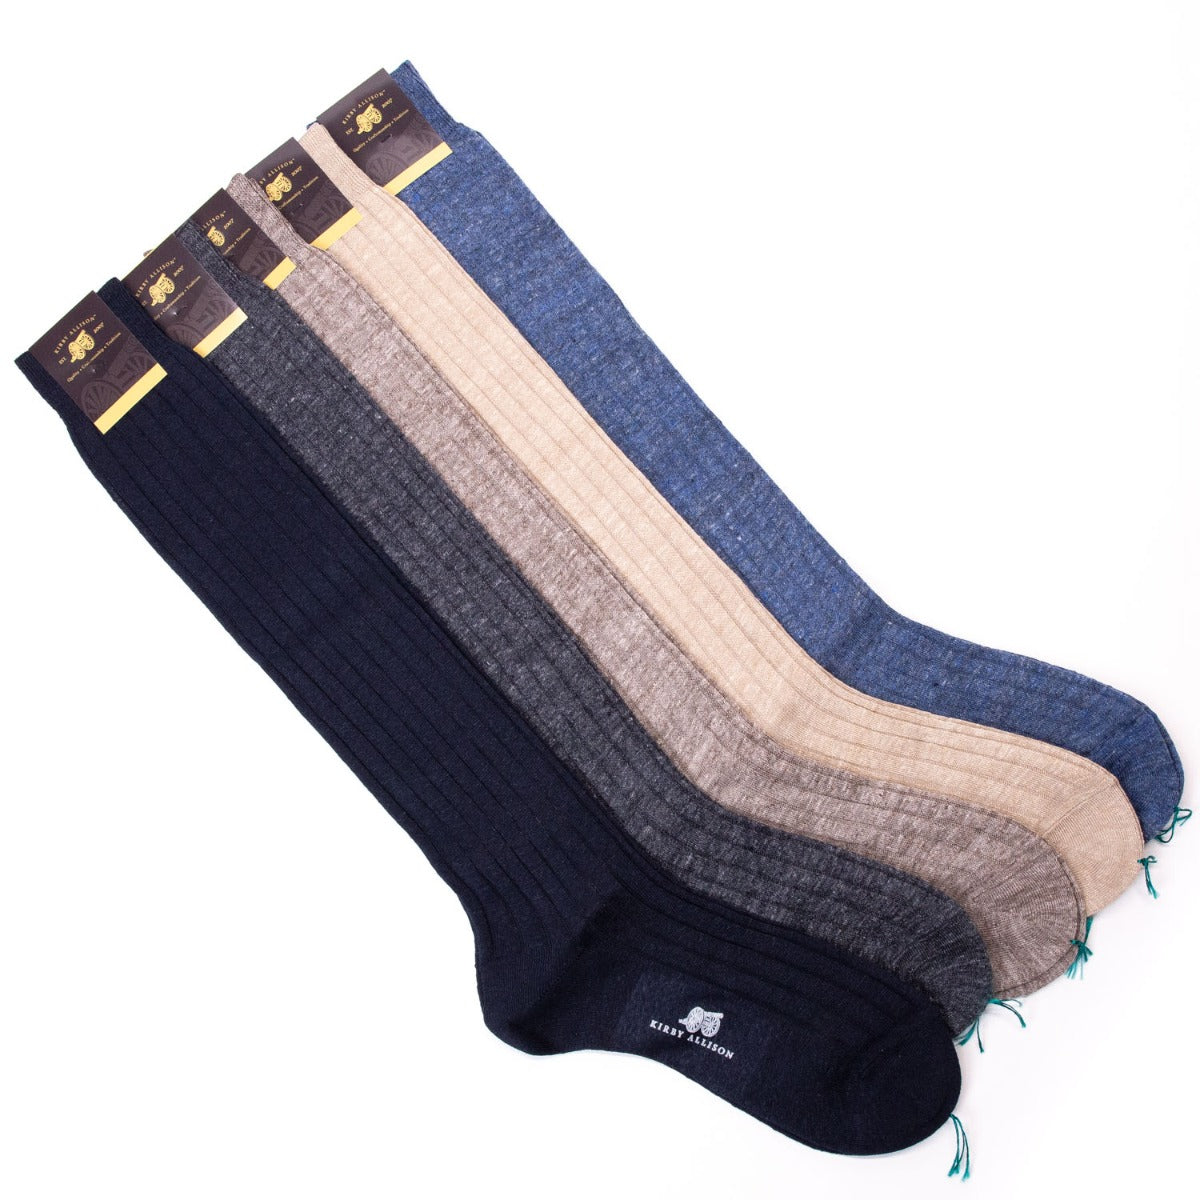 Four pairs of Sovereign Grade 100% Linen Dress Socks OTC in different colors from KirbyAllison.com.